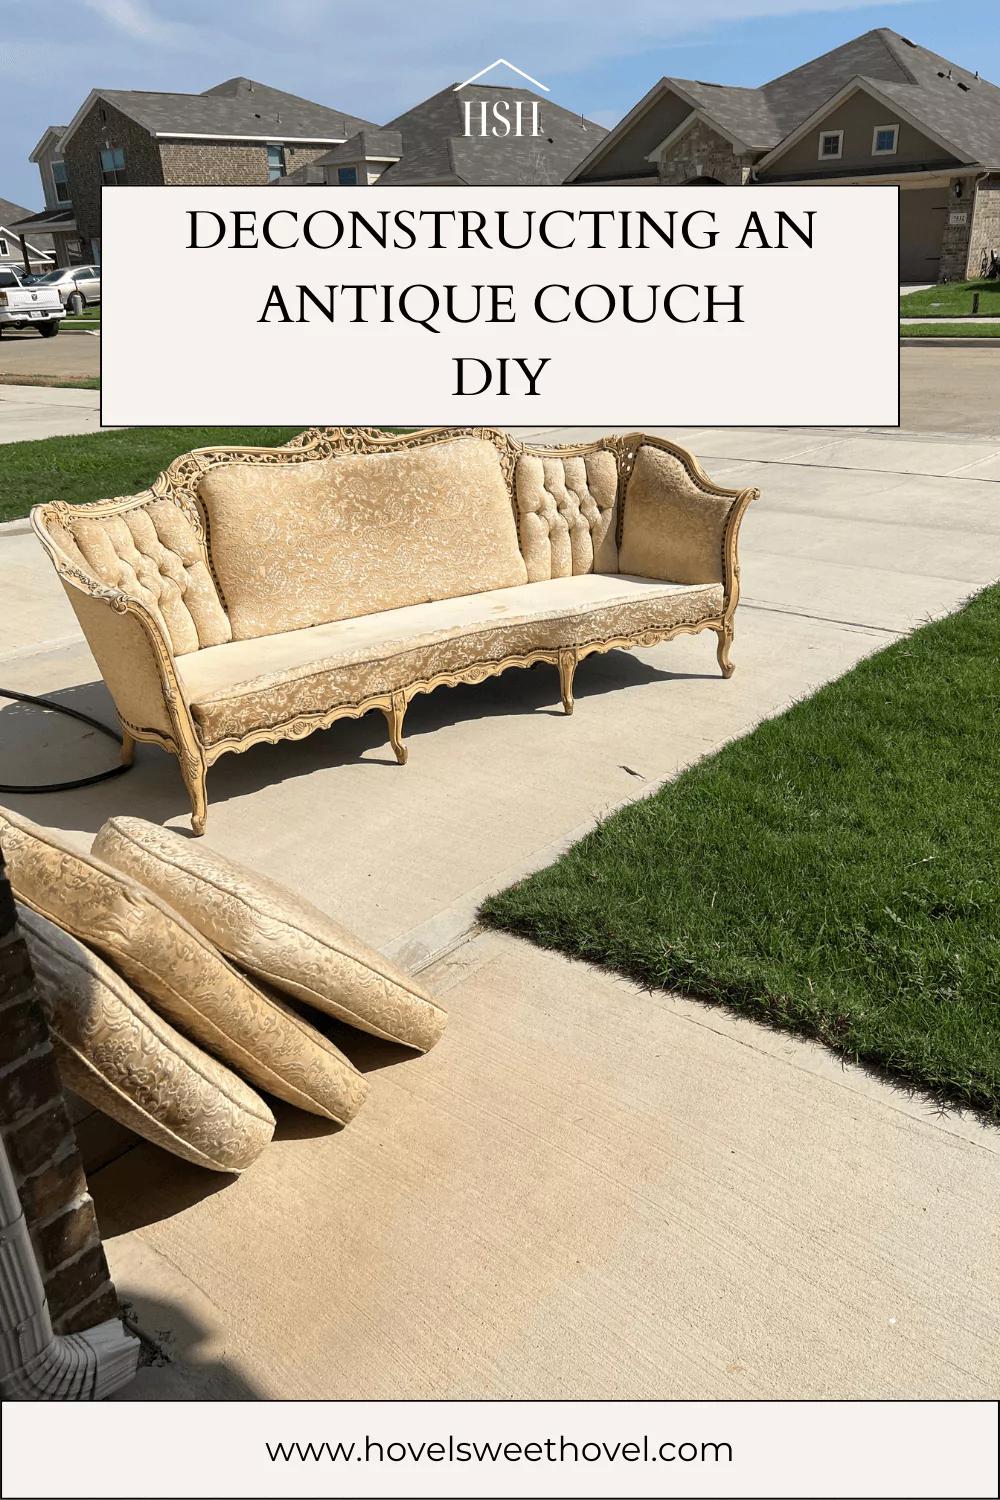 Deconstructing Antique Couch pin